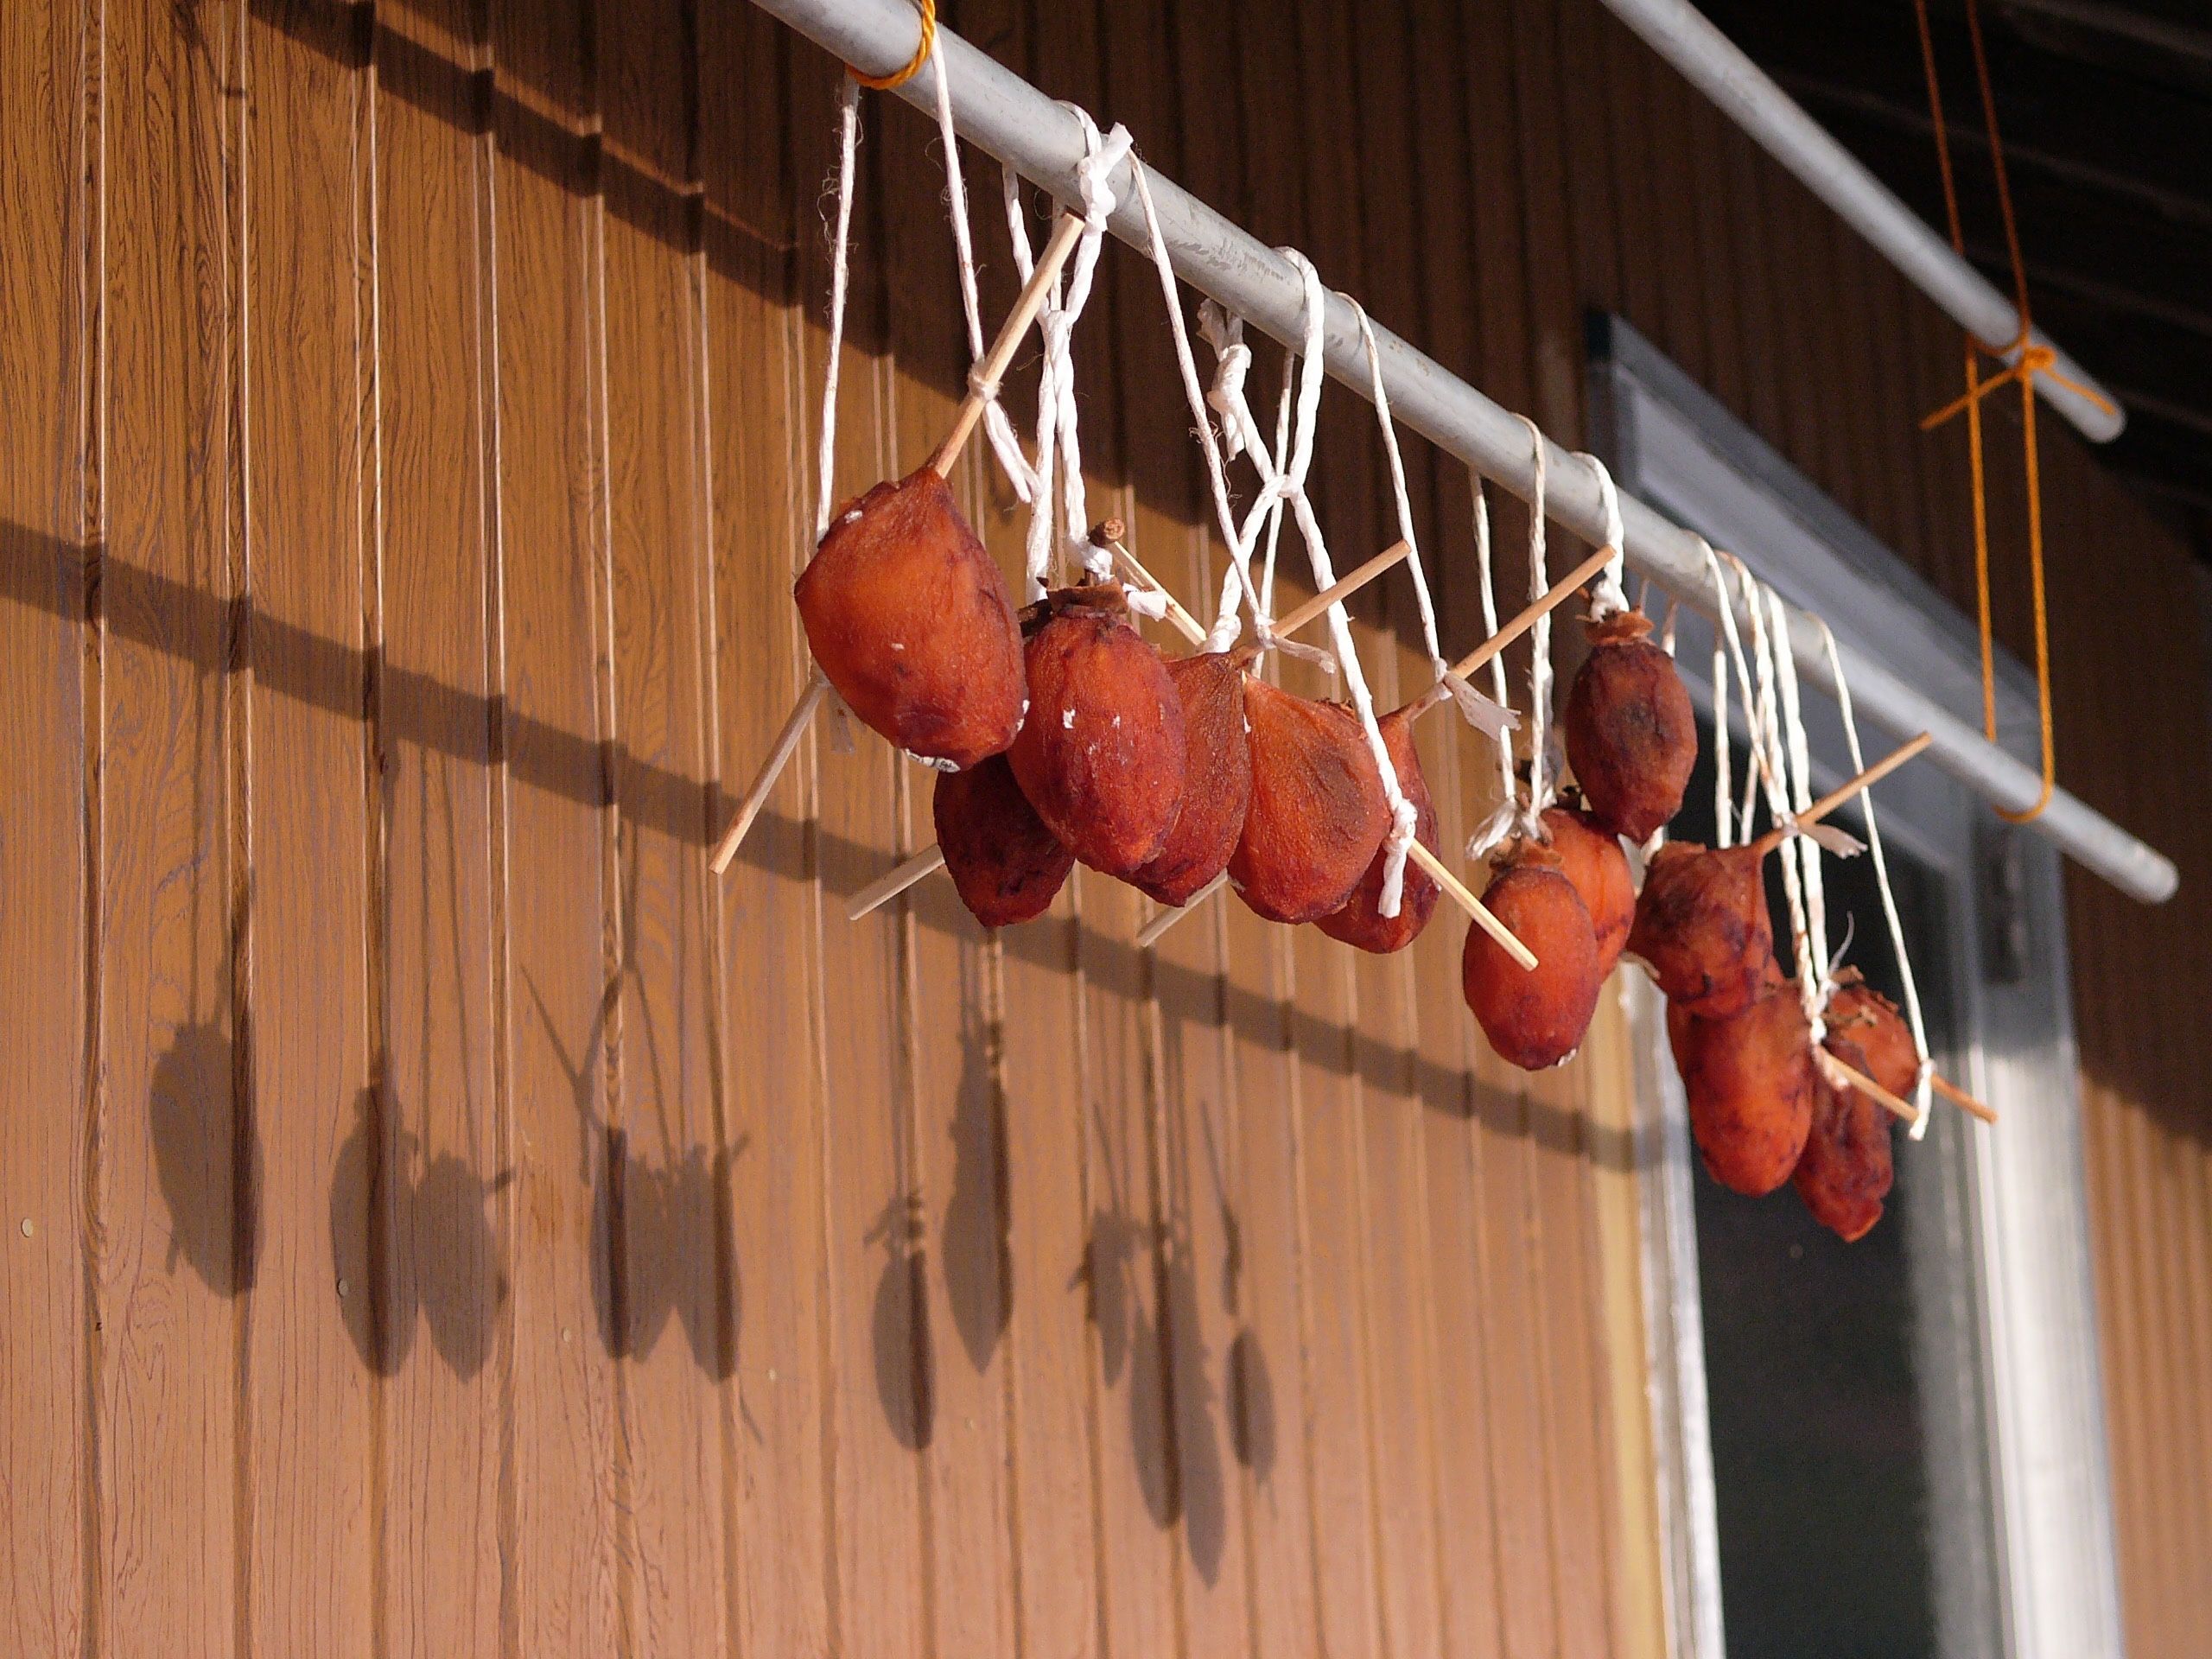 Dried persimmons hanging from a stick, with their shadows on the wall behind them.